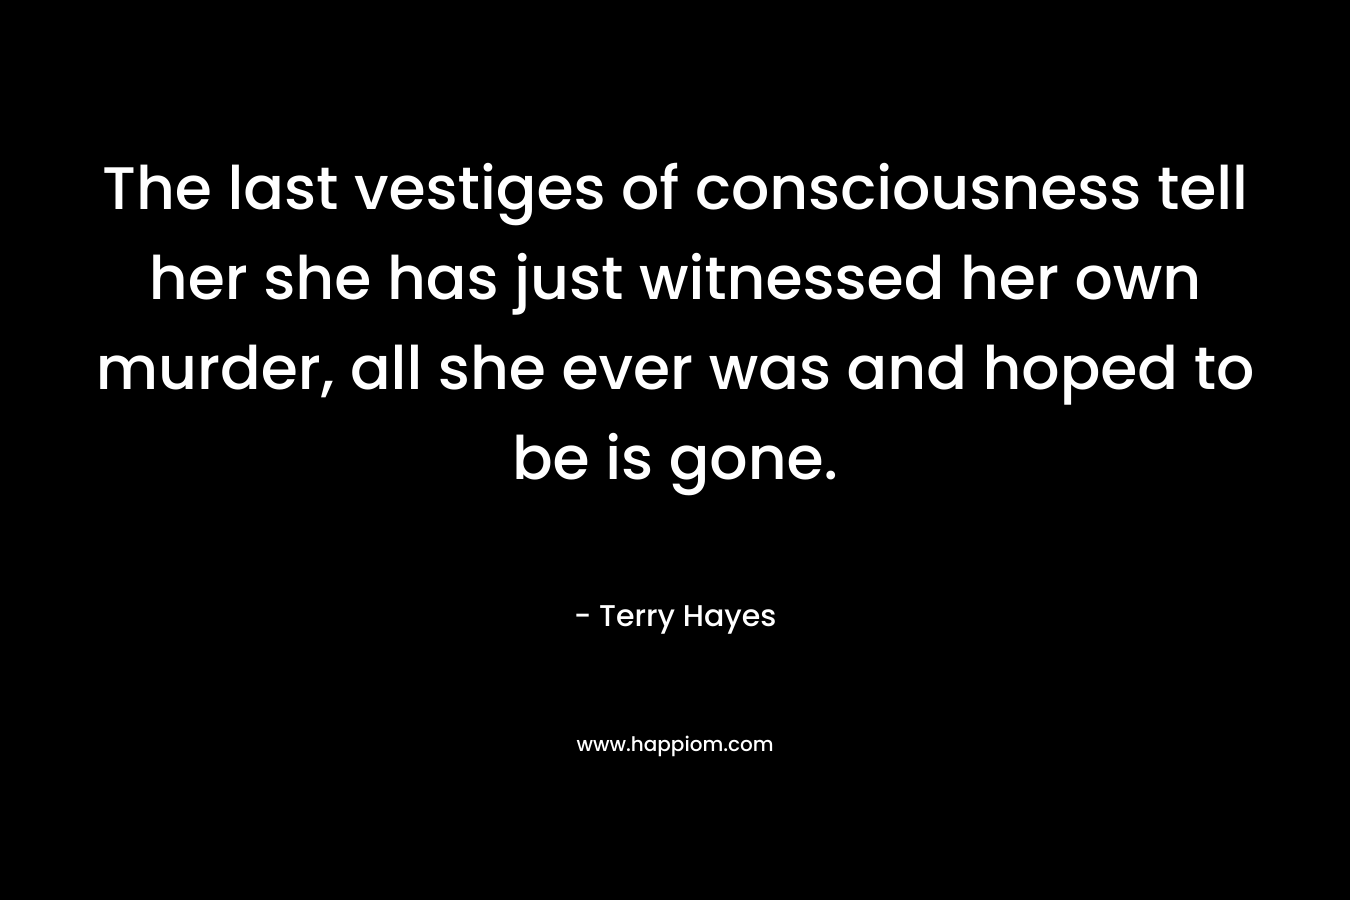 The last vestiges of consciousness tell her she has just witnessed her own murder, all she ever was and hoped to be is gone.